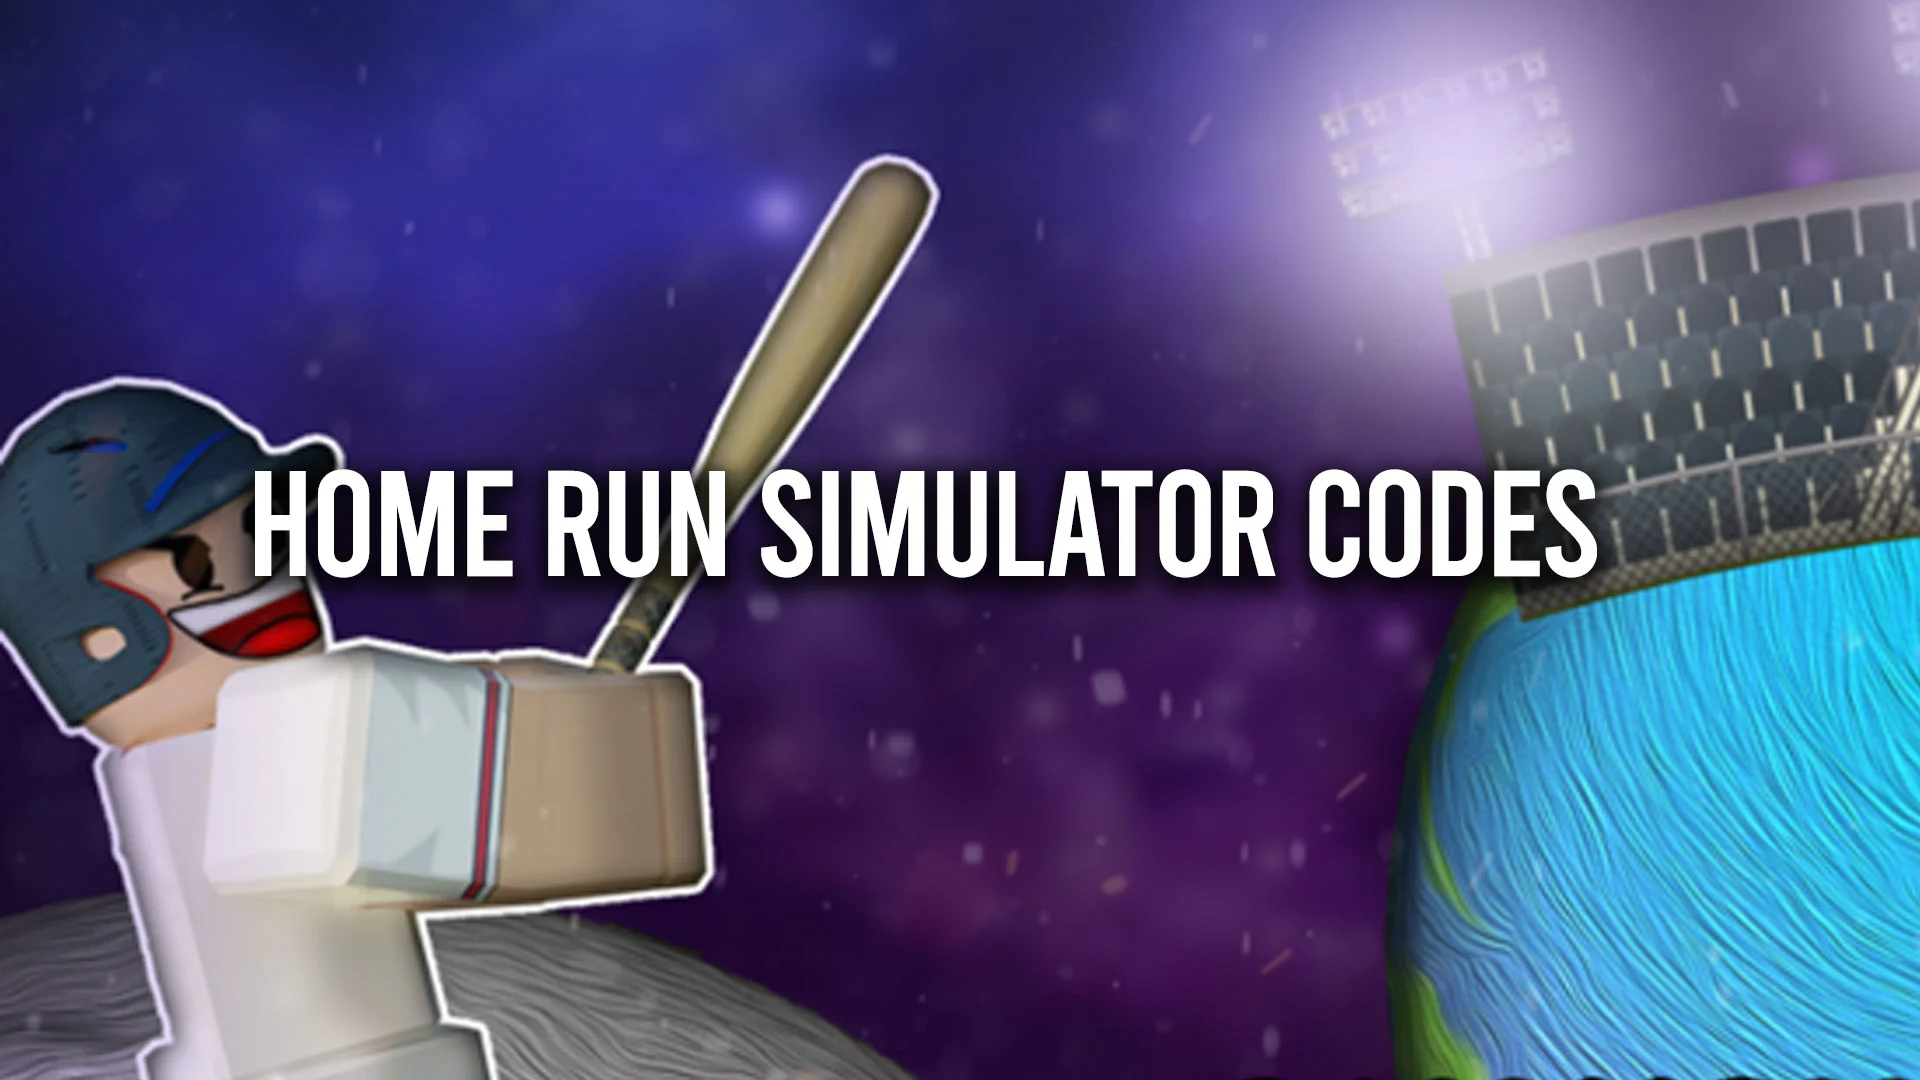 roblox-speed-run-simulator-codes-june-2023-game-specifications